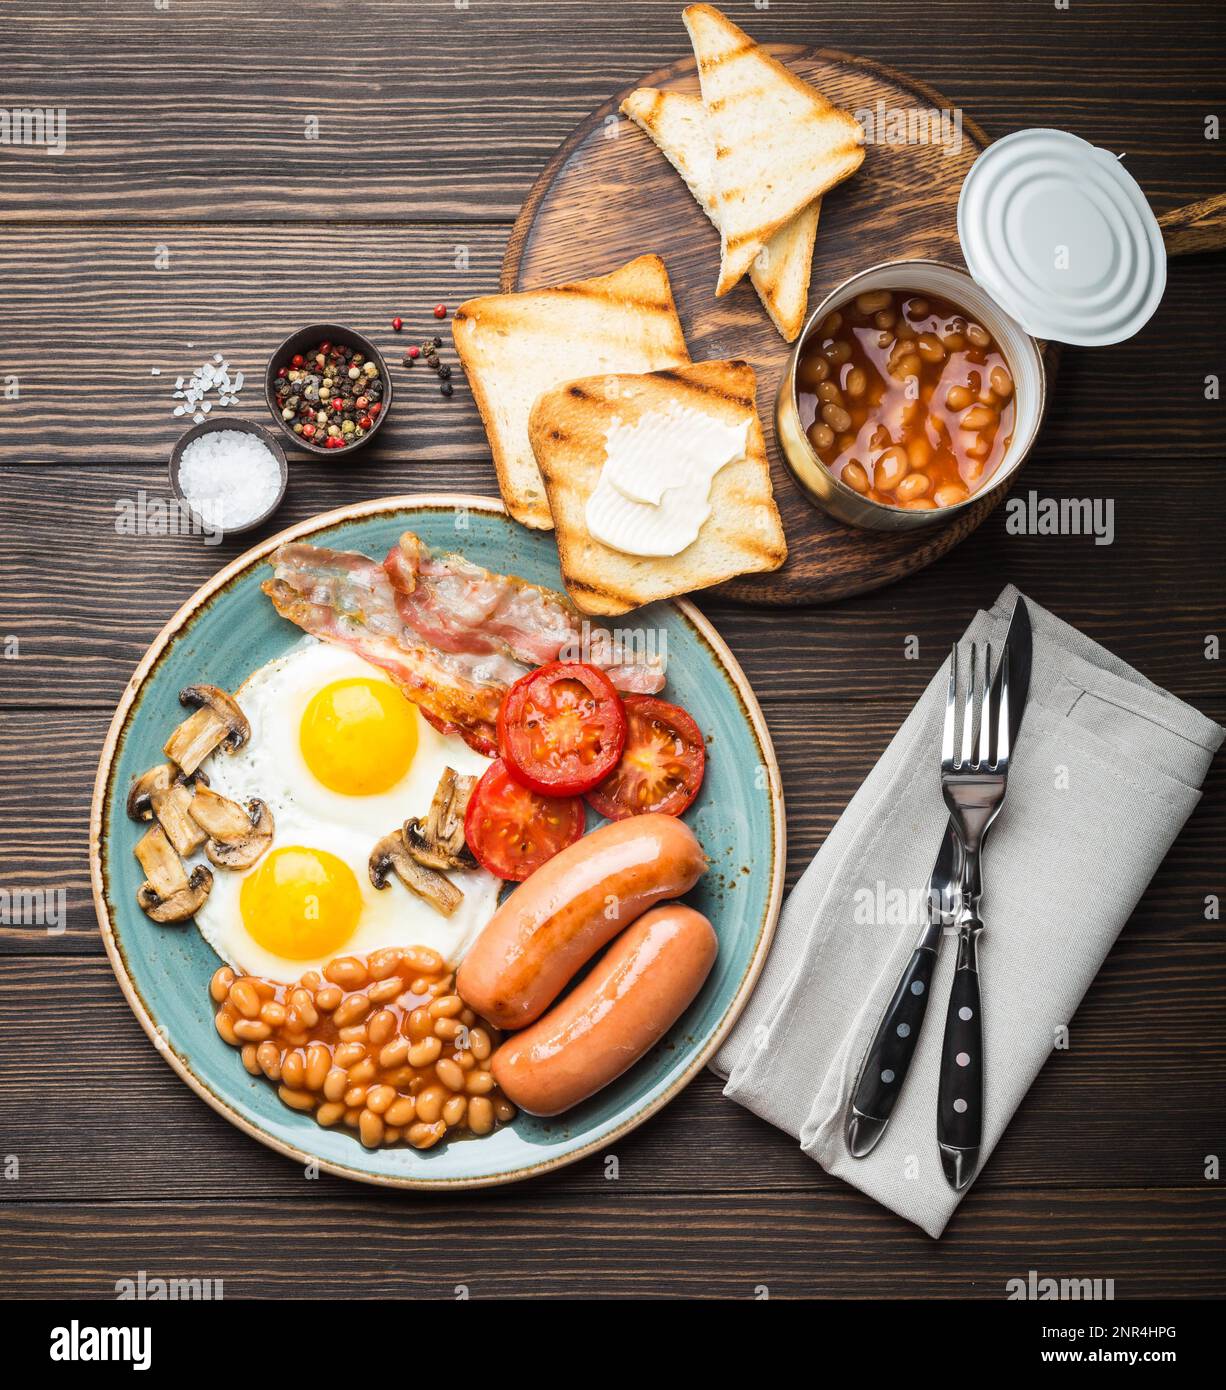 Full English breakfast with fried eggs, sausages, bacon, beans, mushrooms, tomatoes on a plate, bread toasts with butter. Traditional British meal Stock Photo